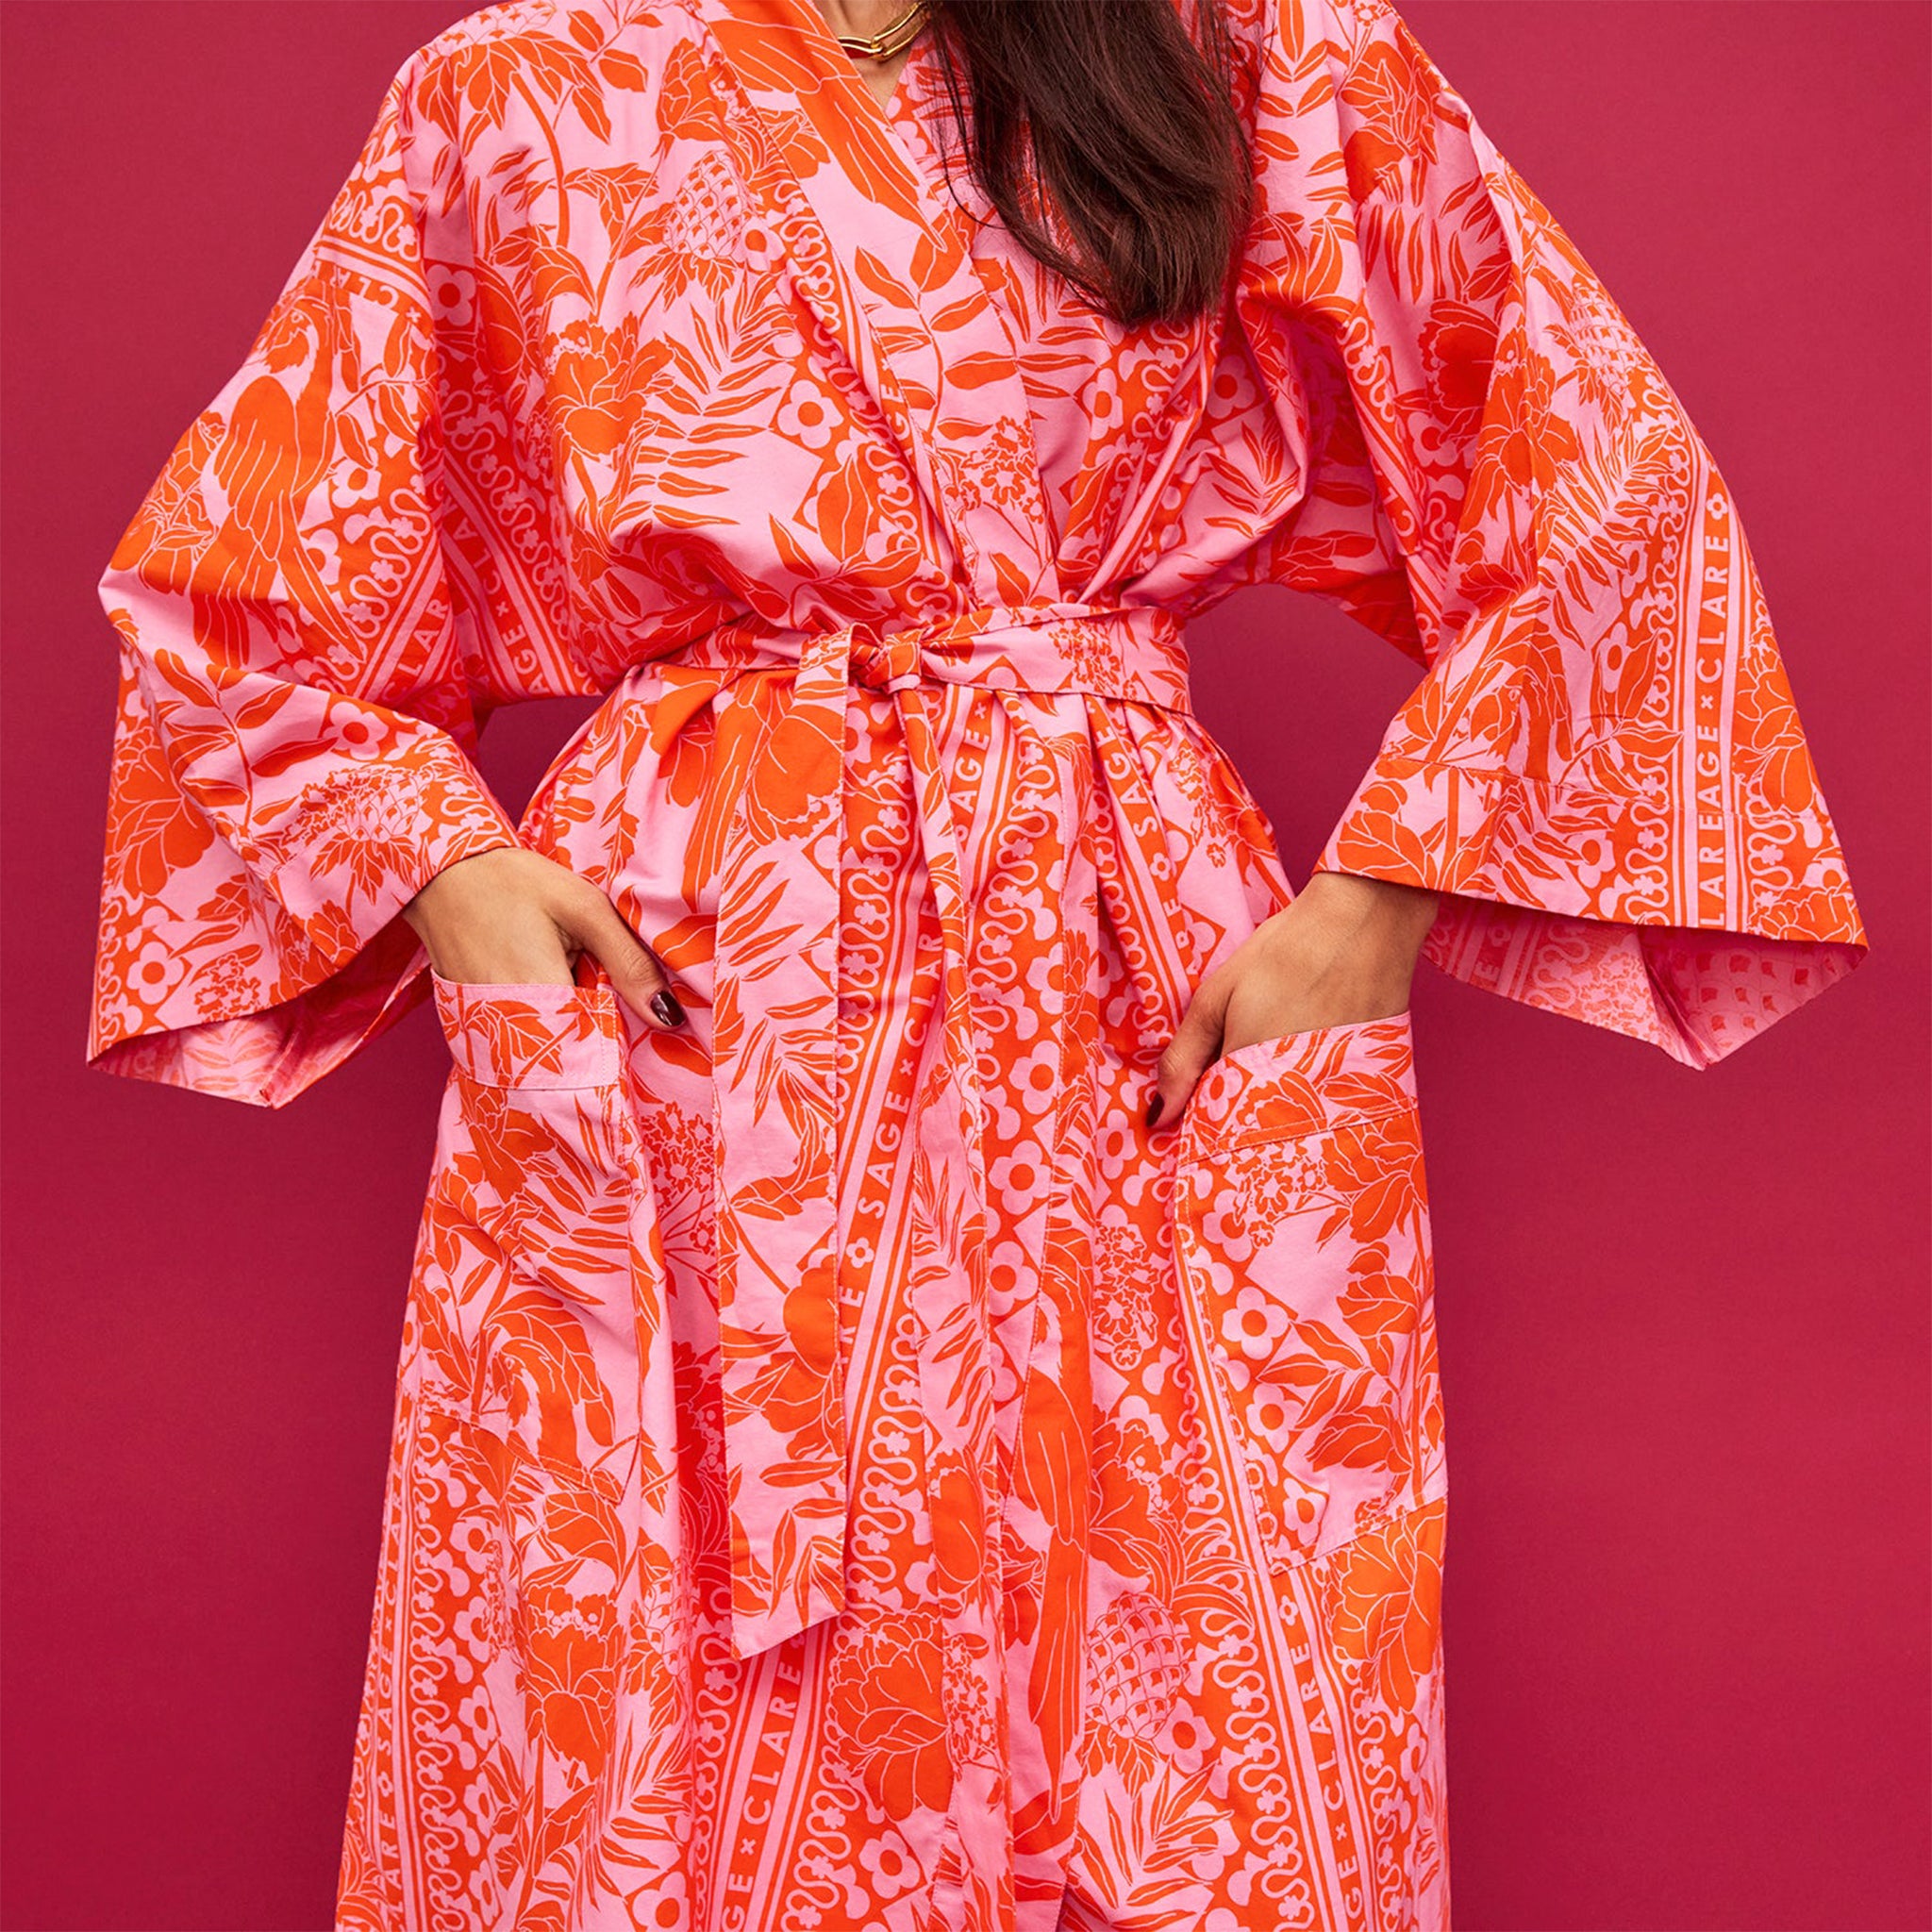 A cotton robe with pockets and an orange and hot pink tropical floral print.